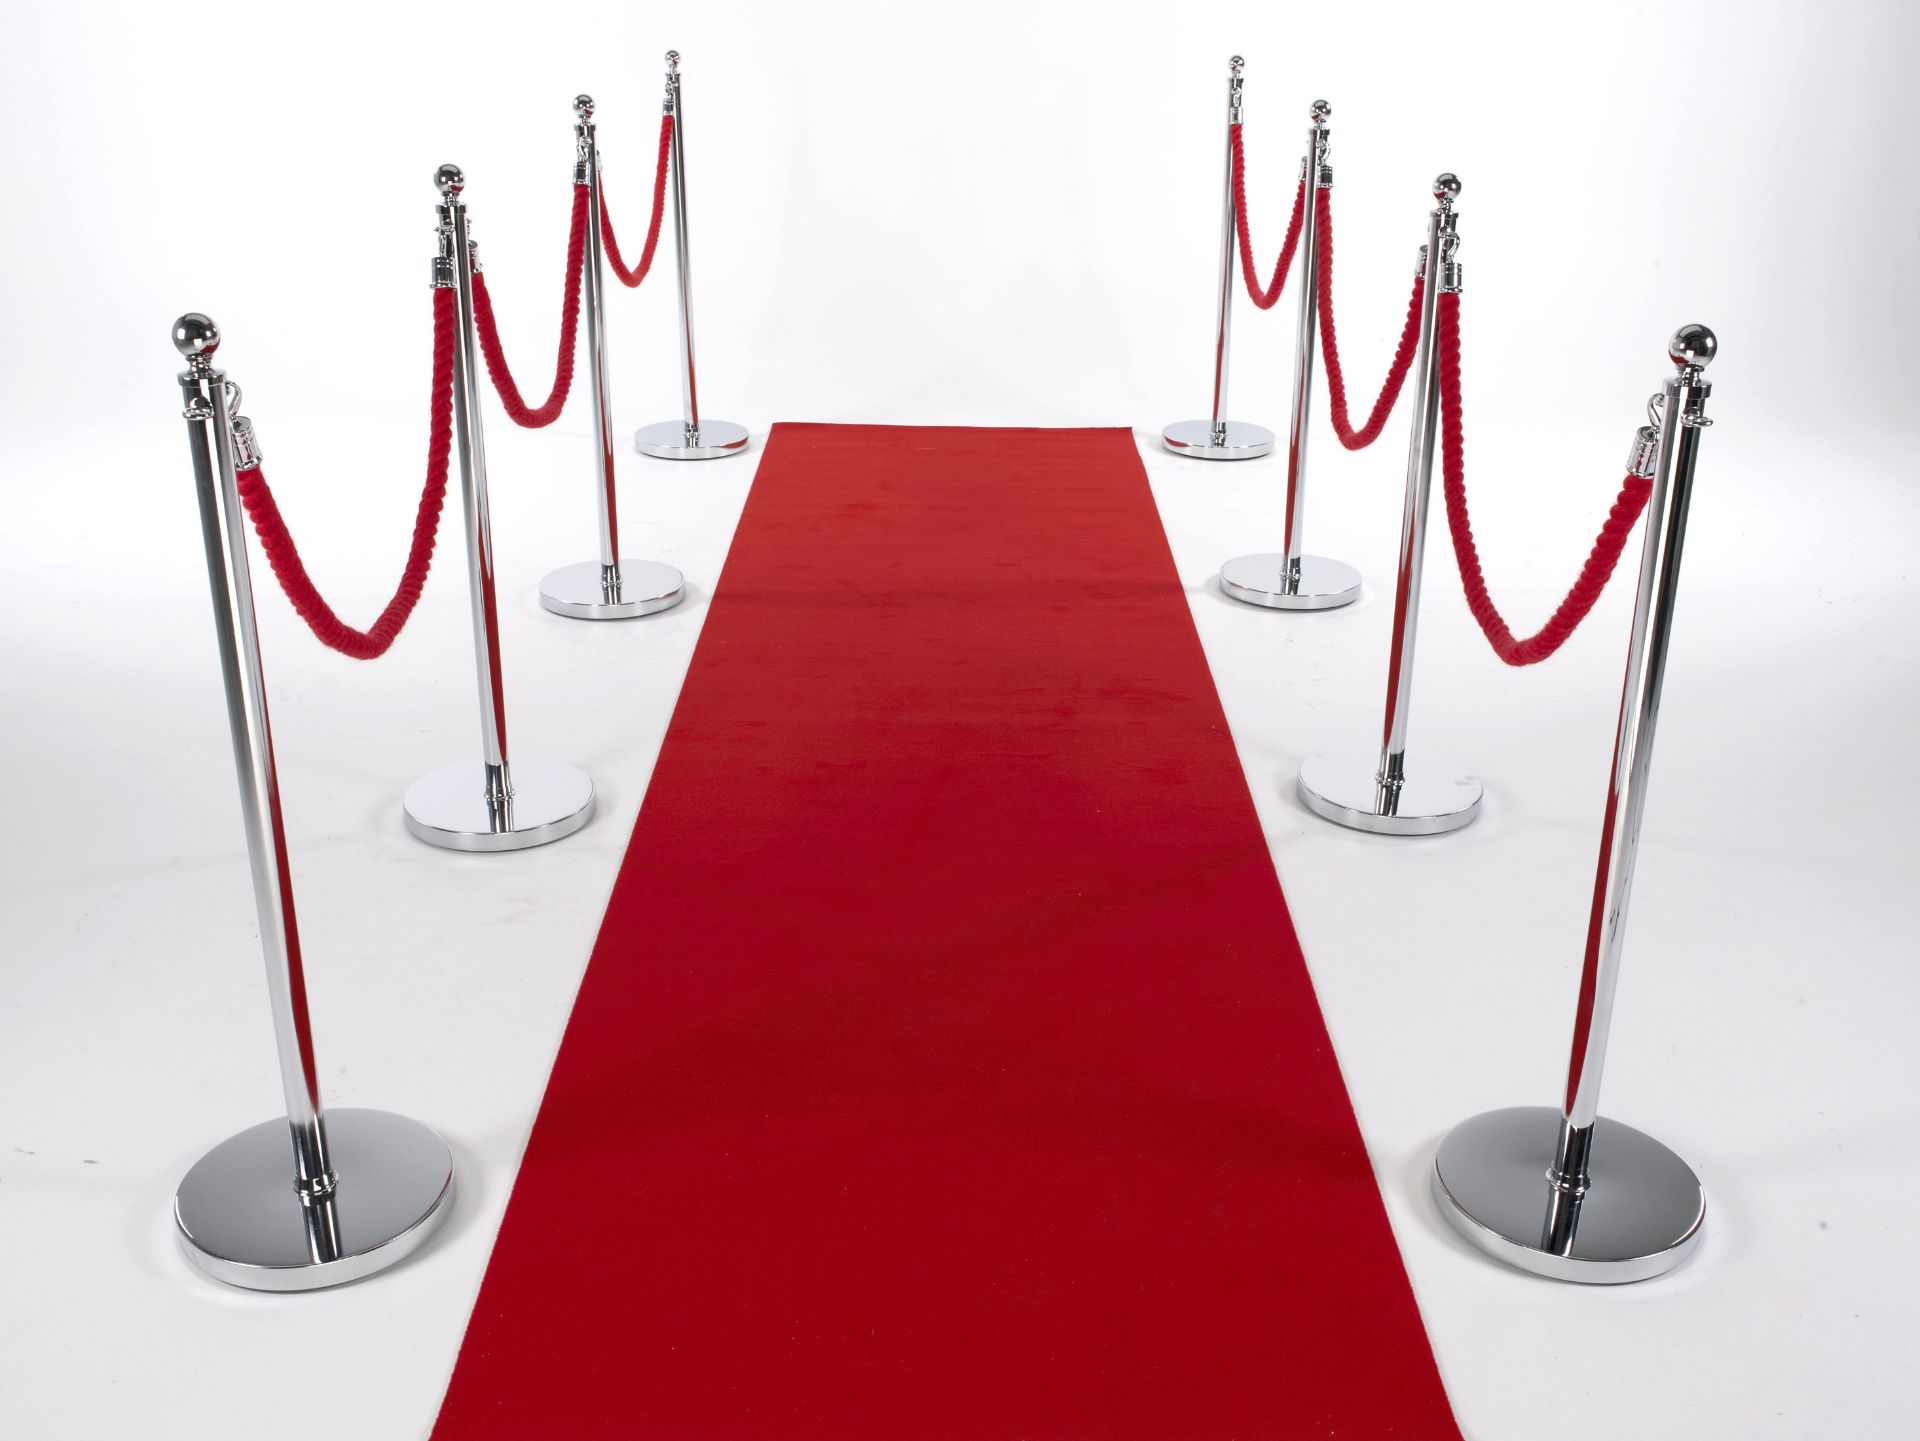 1 x Main Event Queue Barrier System - Includes 6 x Chrome Posts and 6 x Red Ropes With Chrome